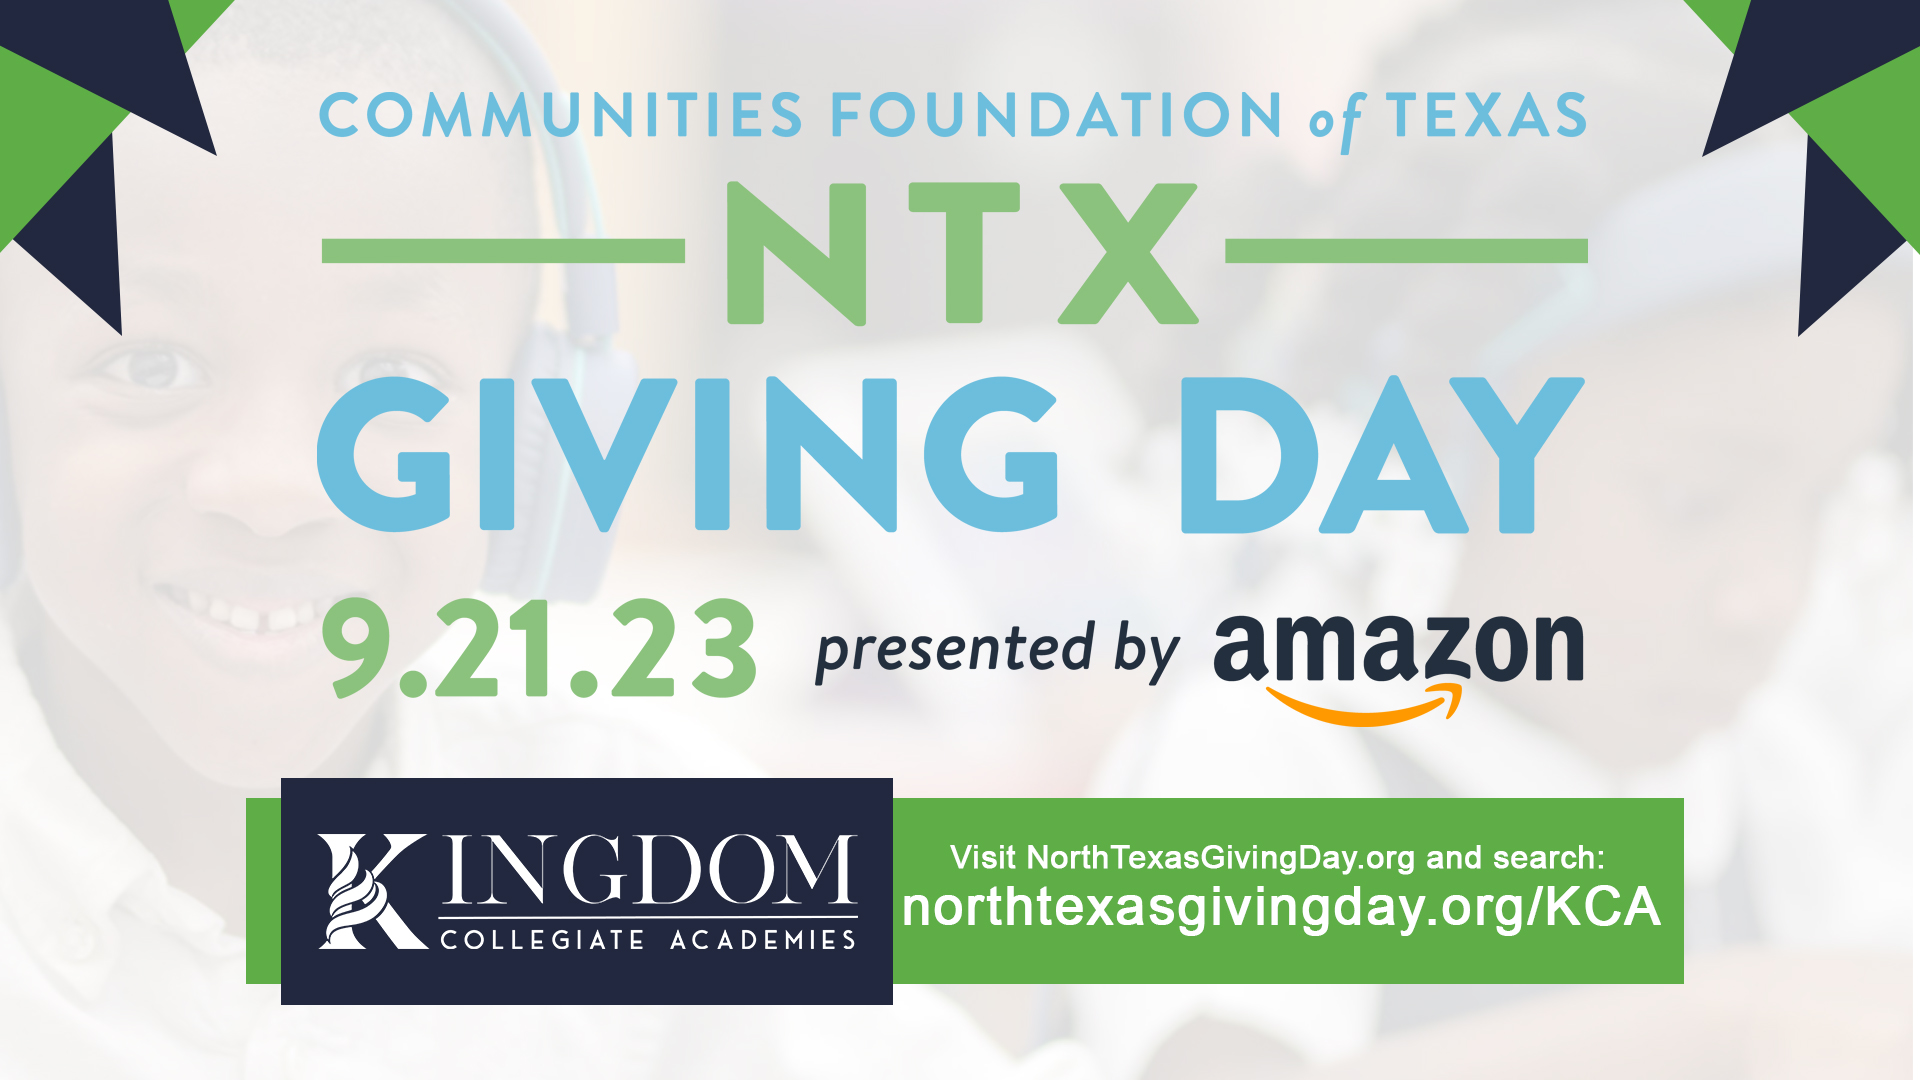 North Texas Giving Day - Support Kingdom Collegiate Academies (KCA)